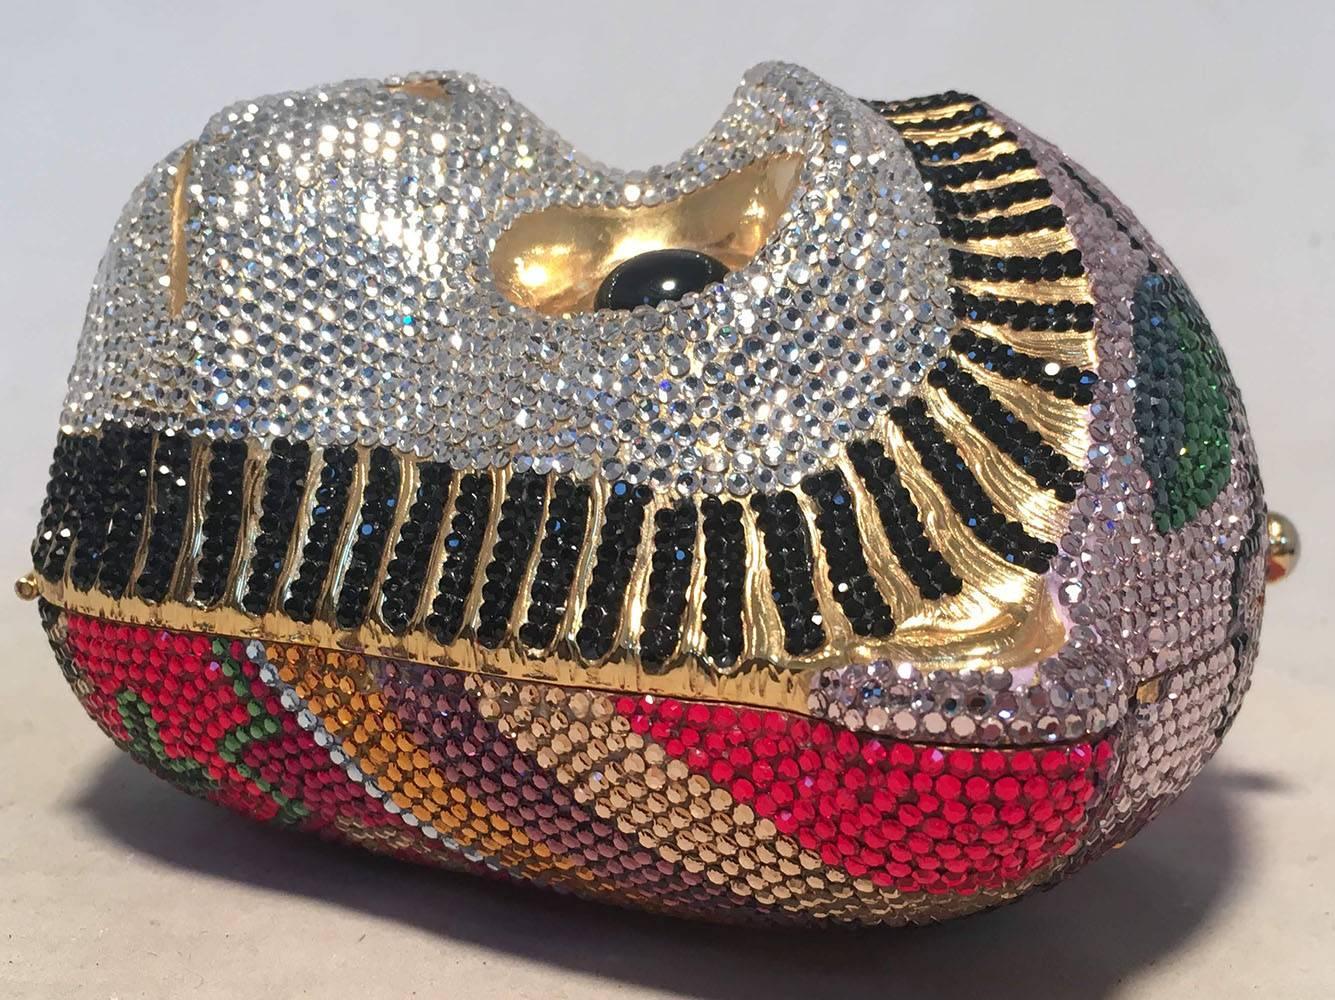 RARE Judith Leiber Swarovski Crystal Monkey Head Minaudiere Evening Bag in excellent condition.  Multicolor swarovski crystal exterior trimmed with black round glass beaded eyes and black and clear crystal face with striped outline detail. Top